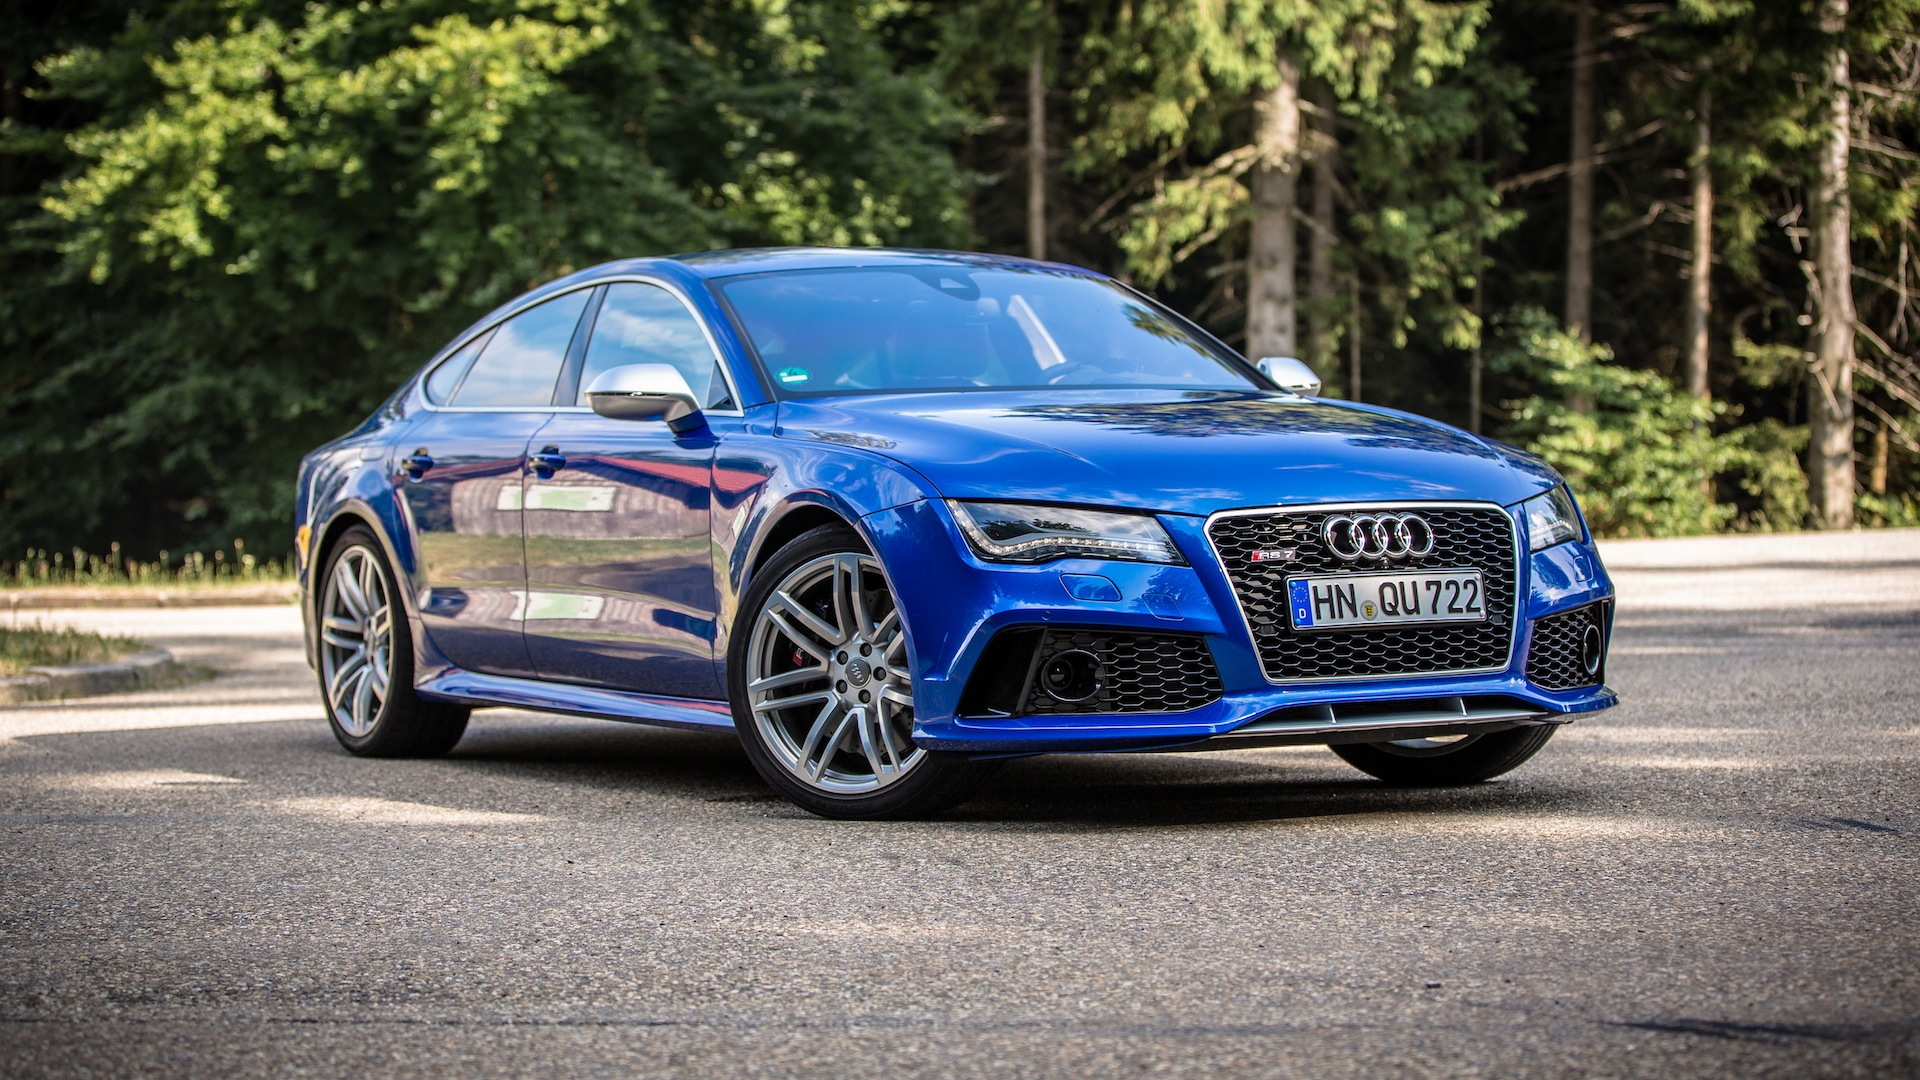 2014 Audi RS 7, First Drive